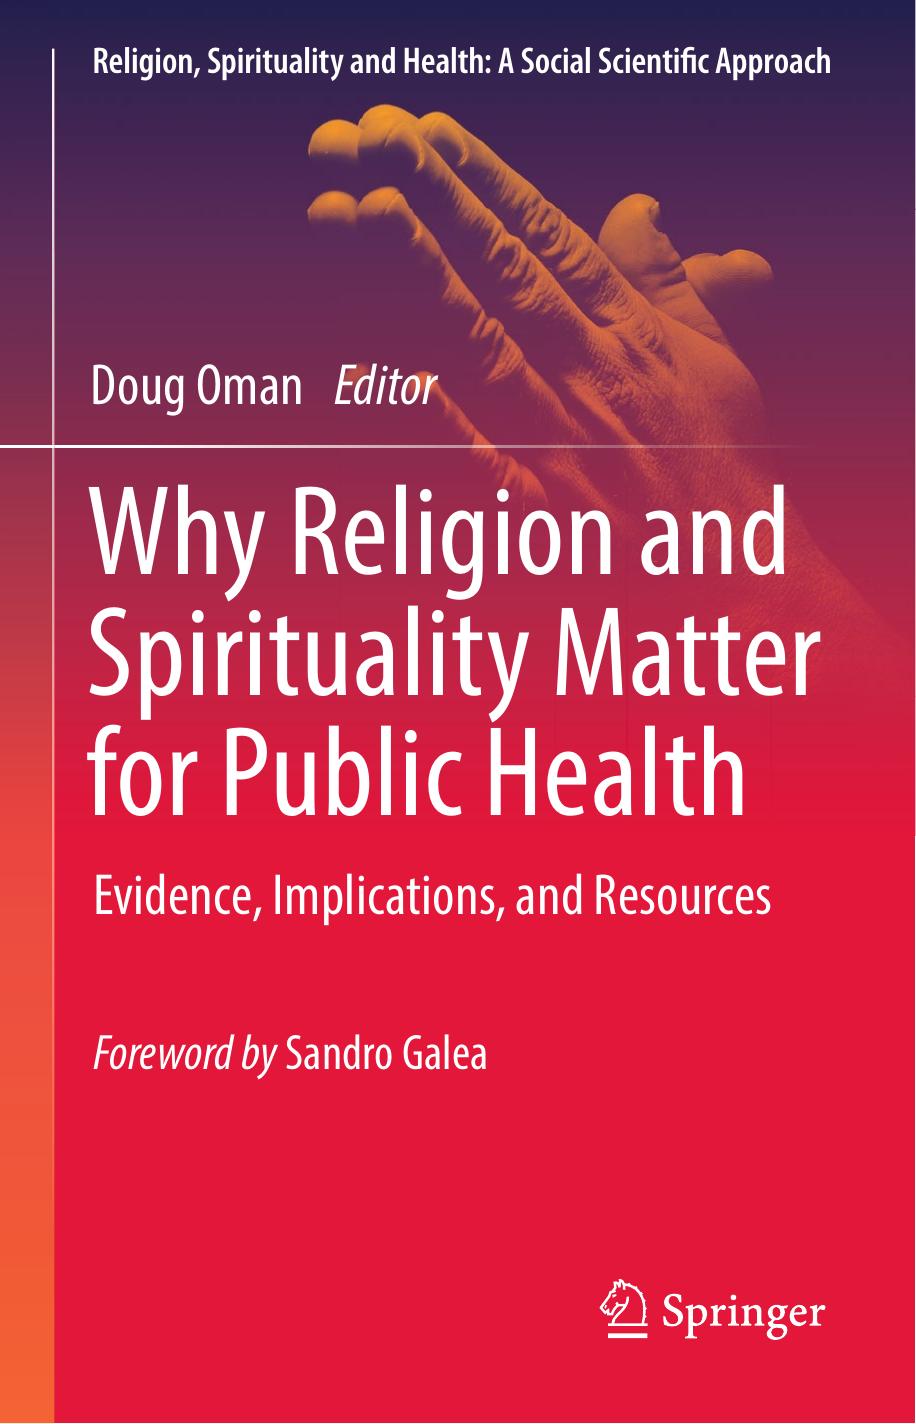 Why Religion and Spirituality Matter for Public Health 2018